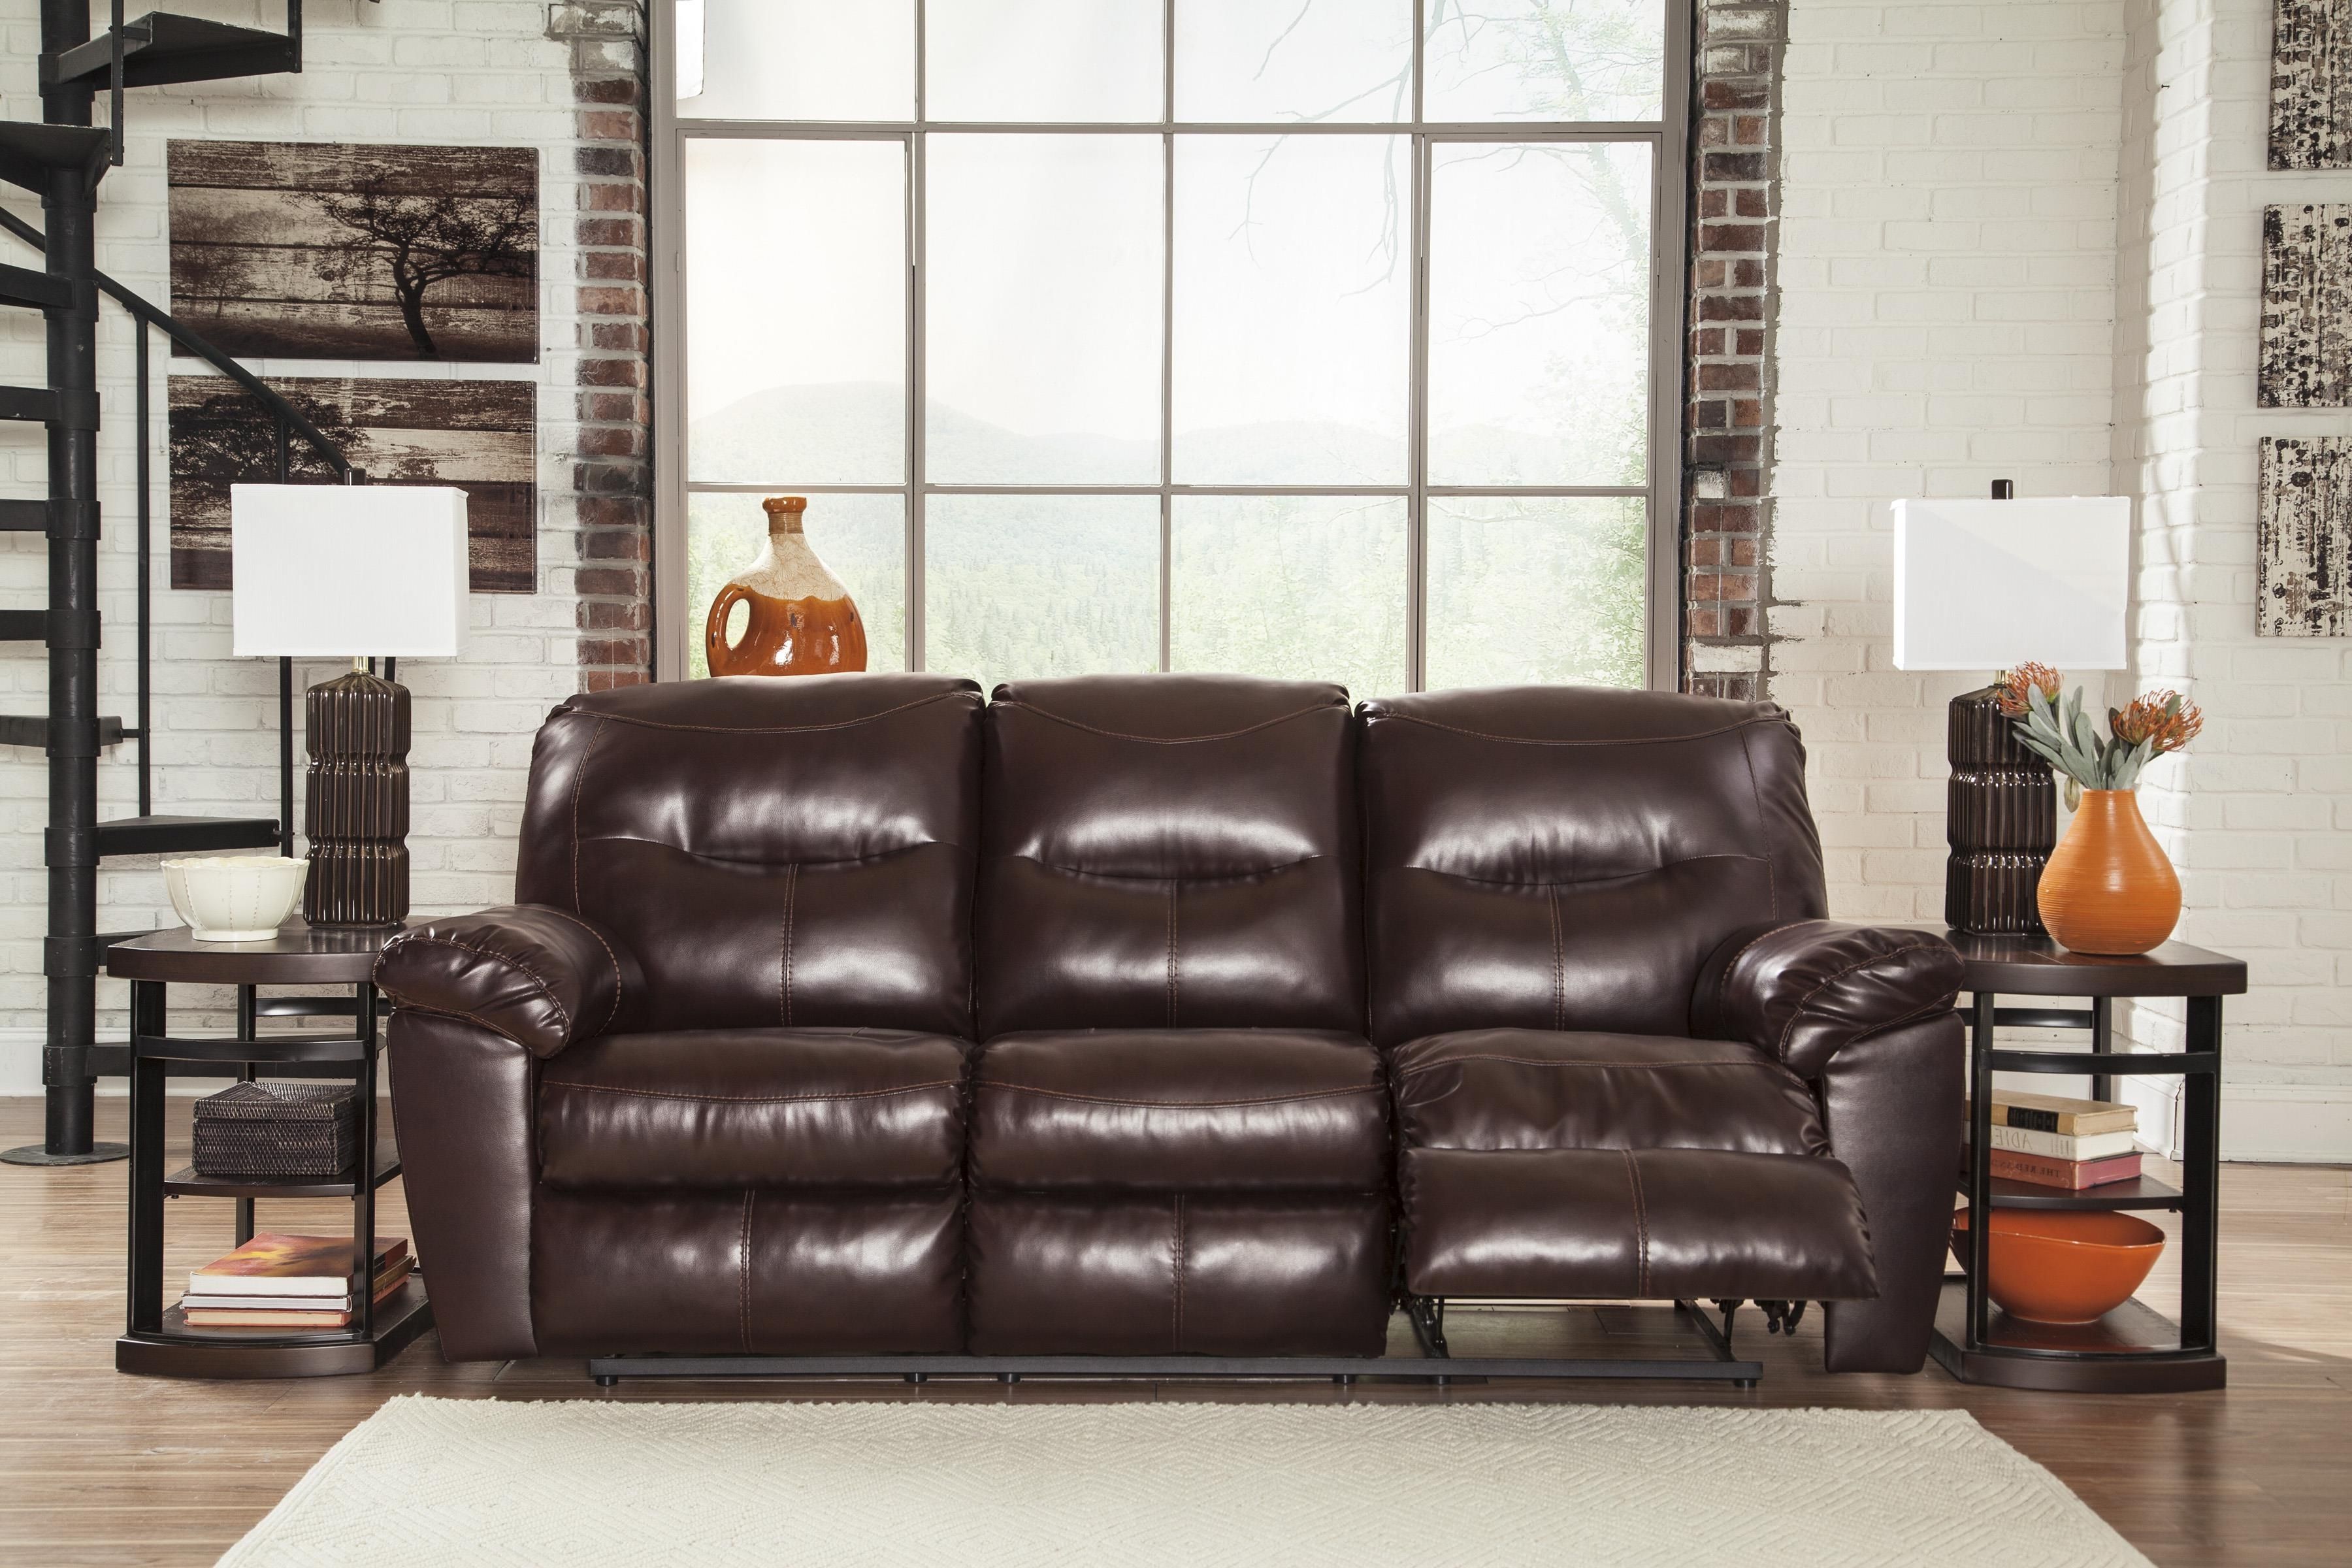 Newest Sears Sectional Sofas Intended For Modern Leather Sectional Sofa With Recliners Sears Sectional Sofas (Photo 1 of 15)